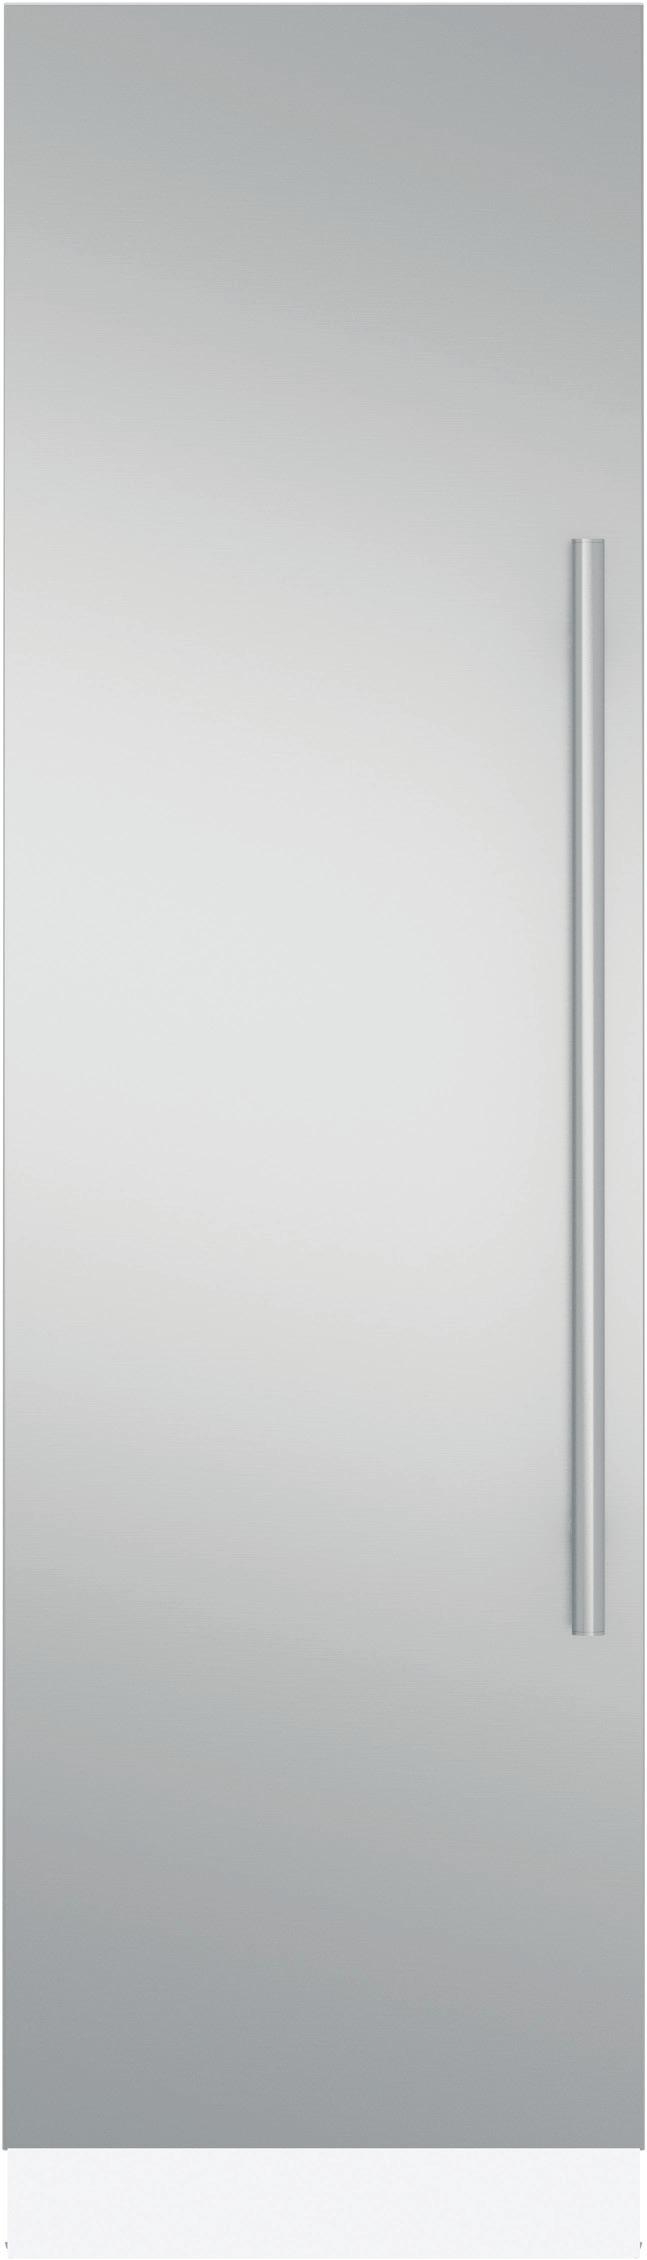 MONOGRAM 24" INTEGRATED FREEZER ZIF240NPKII FEATURES AND ENEFITS FULLY INTEGRATED COLUMN DESIGN With concealed hinge offers a look of seamless perfection that installs flush with surrounding